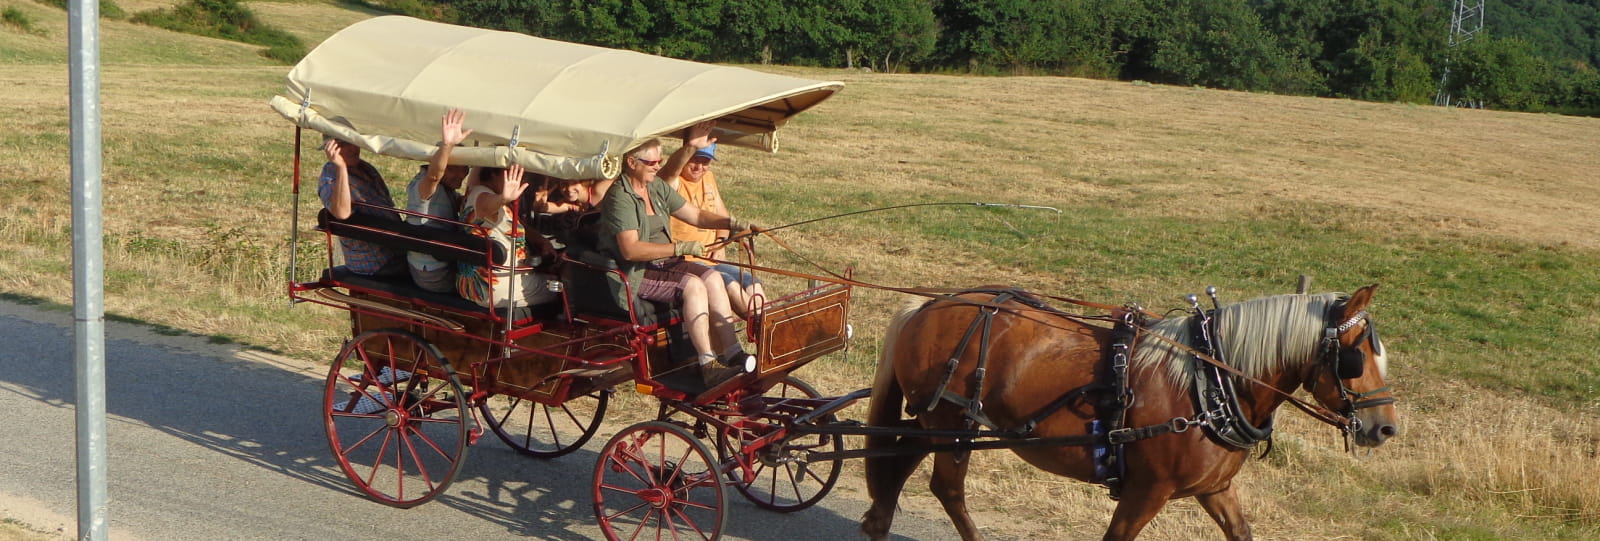 Carriage ride at the Bonnefontaine farm